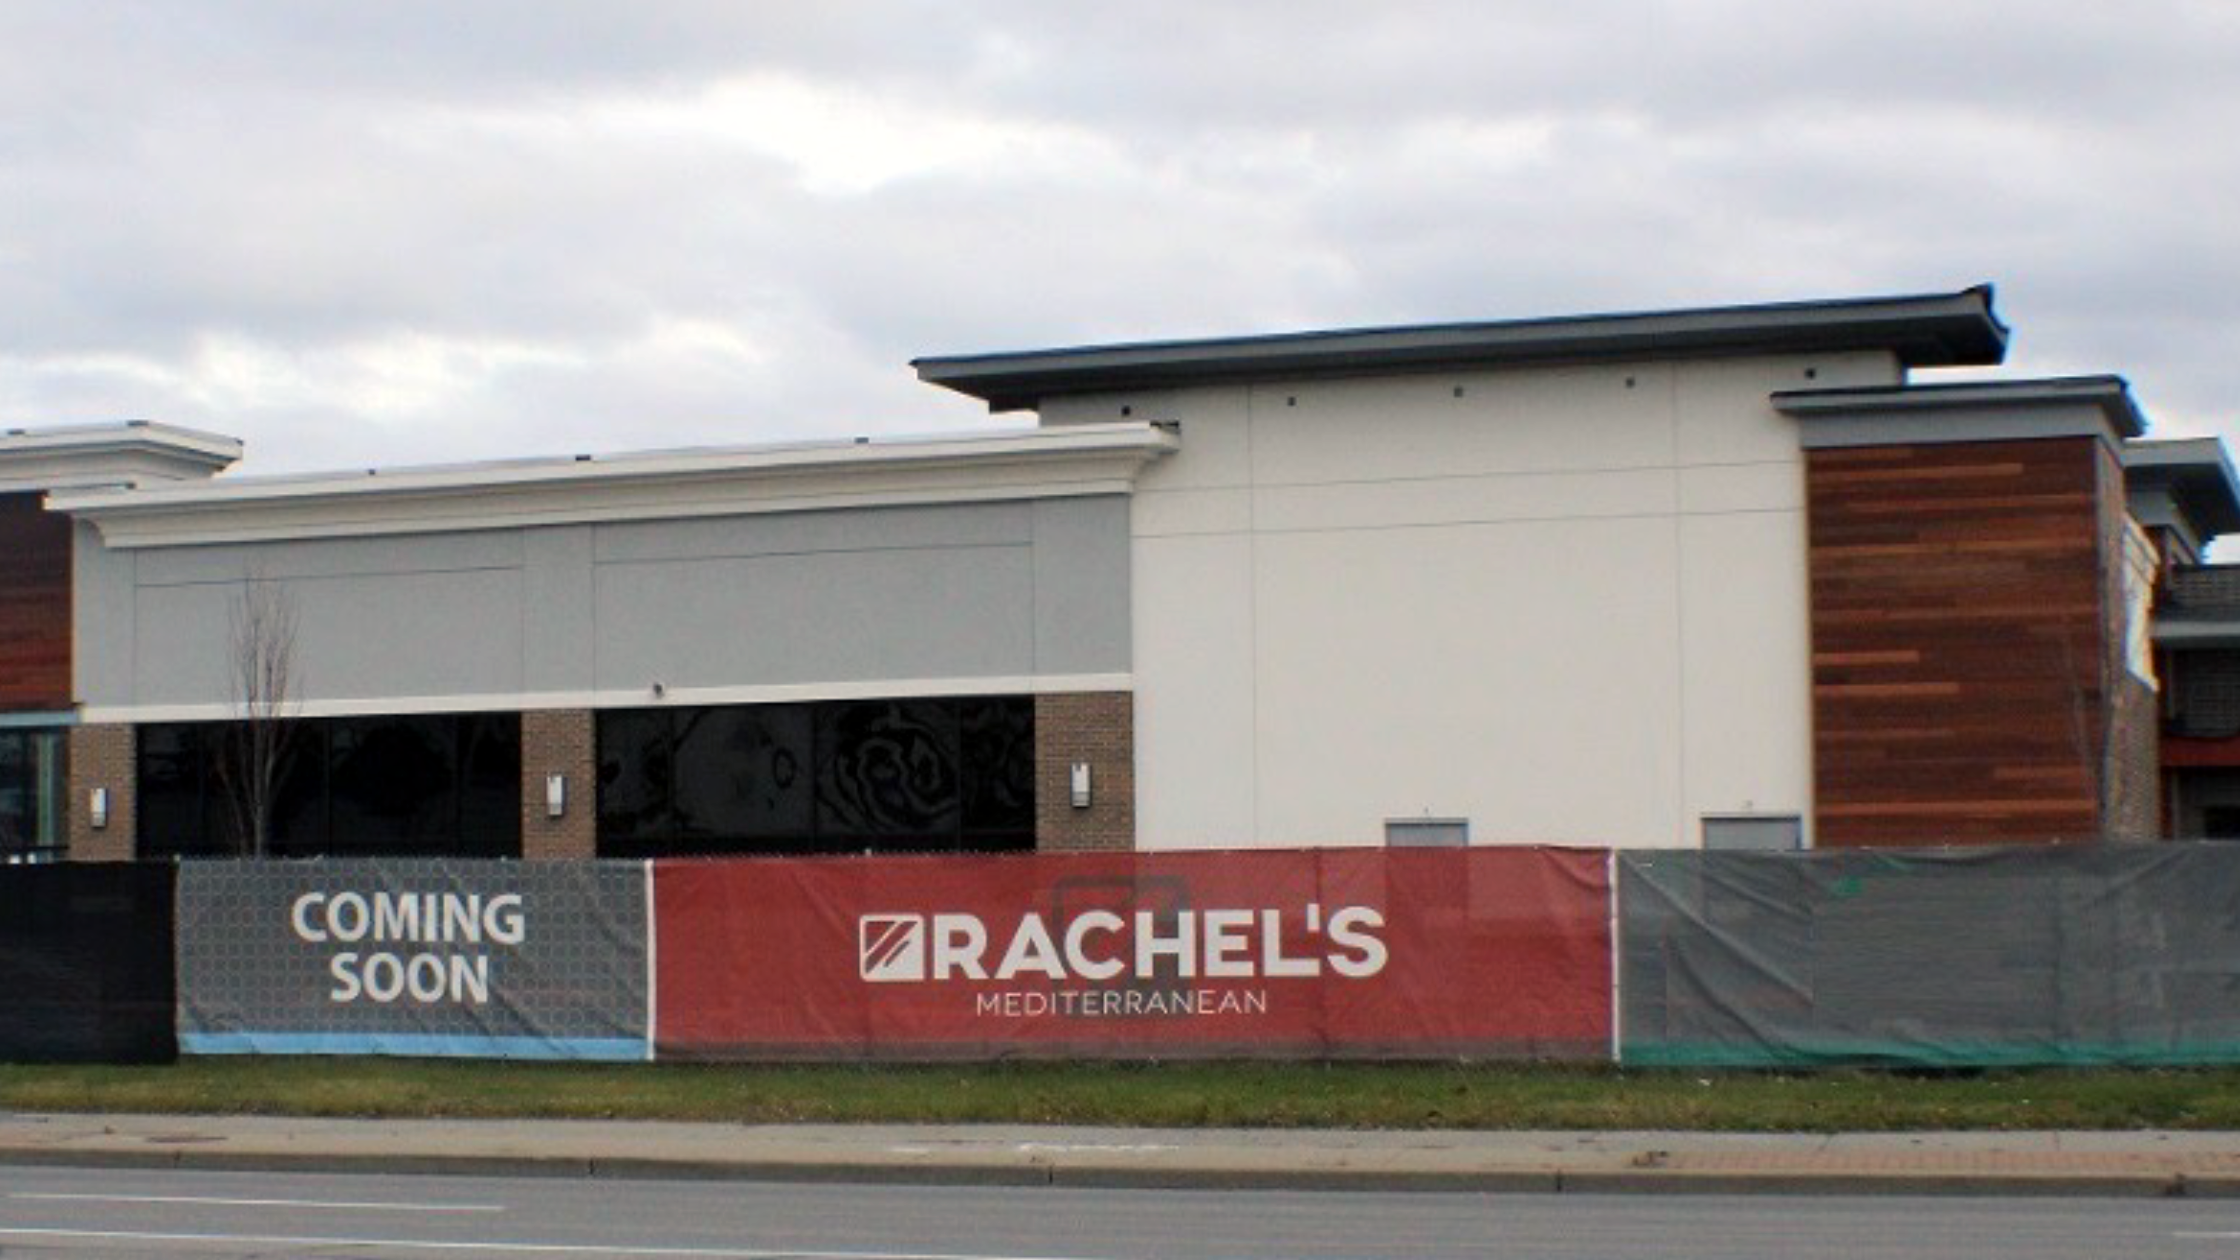 Rachels-Teams-Up-With-Concept-Construction-to-Build-Newest-Location-in-Tonawanda,-NY-Featured-Image